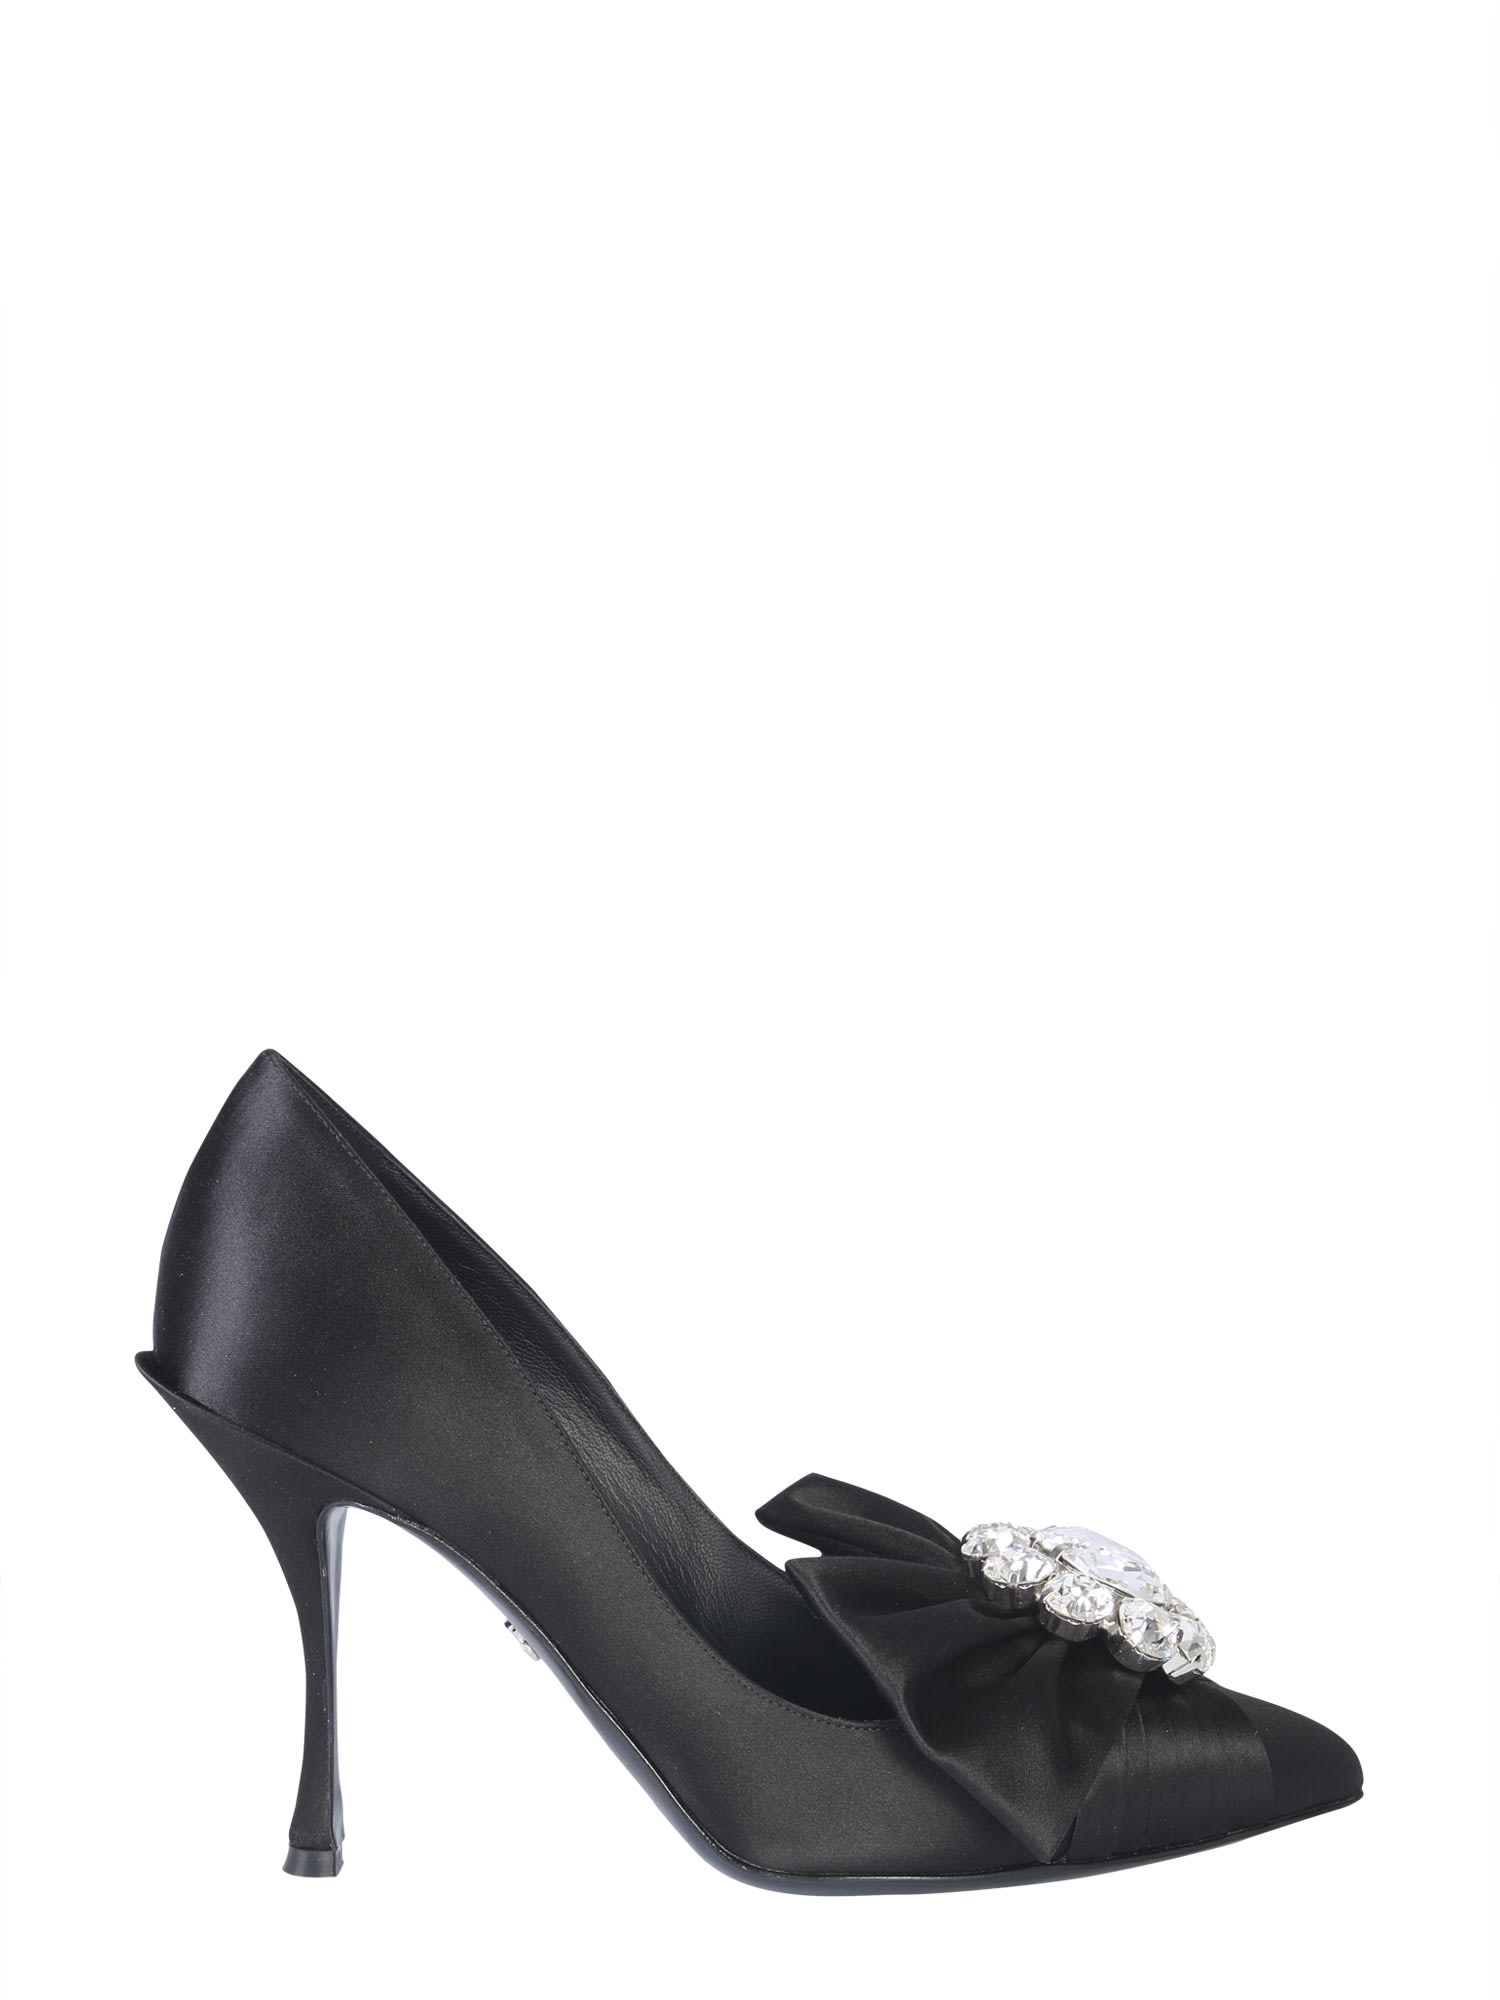 Buy Dolce & Gabbana D?ollet?With Bow And Crystals online, shop Dolce & Gabbana shoes with free shipping